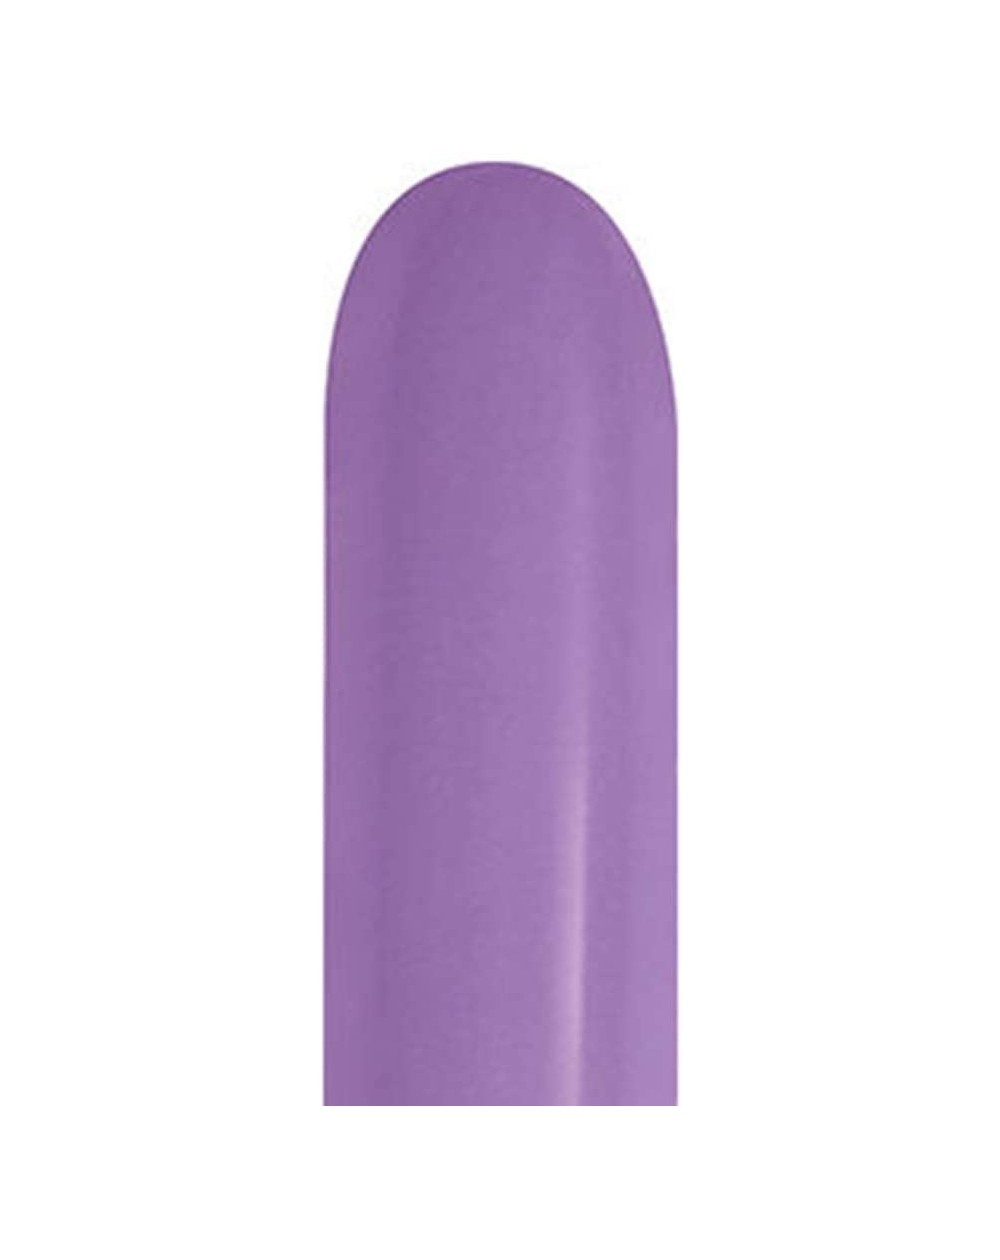 Balloons Solid 260B Nozzles Up Balloons - Deluxe Lilac (50/Pack) - Deluxe Lilac - CB18K5Q897L $10.73